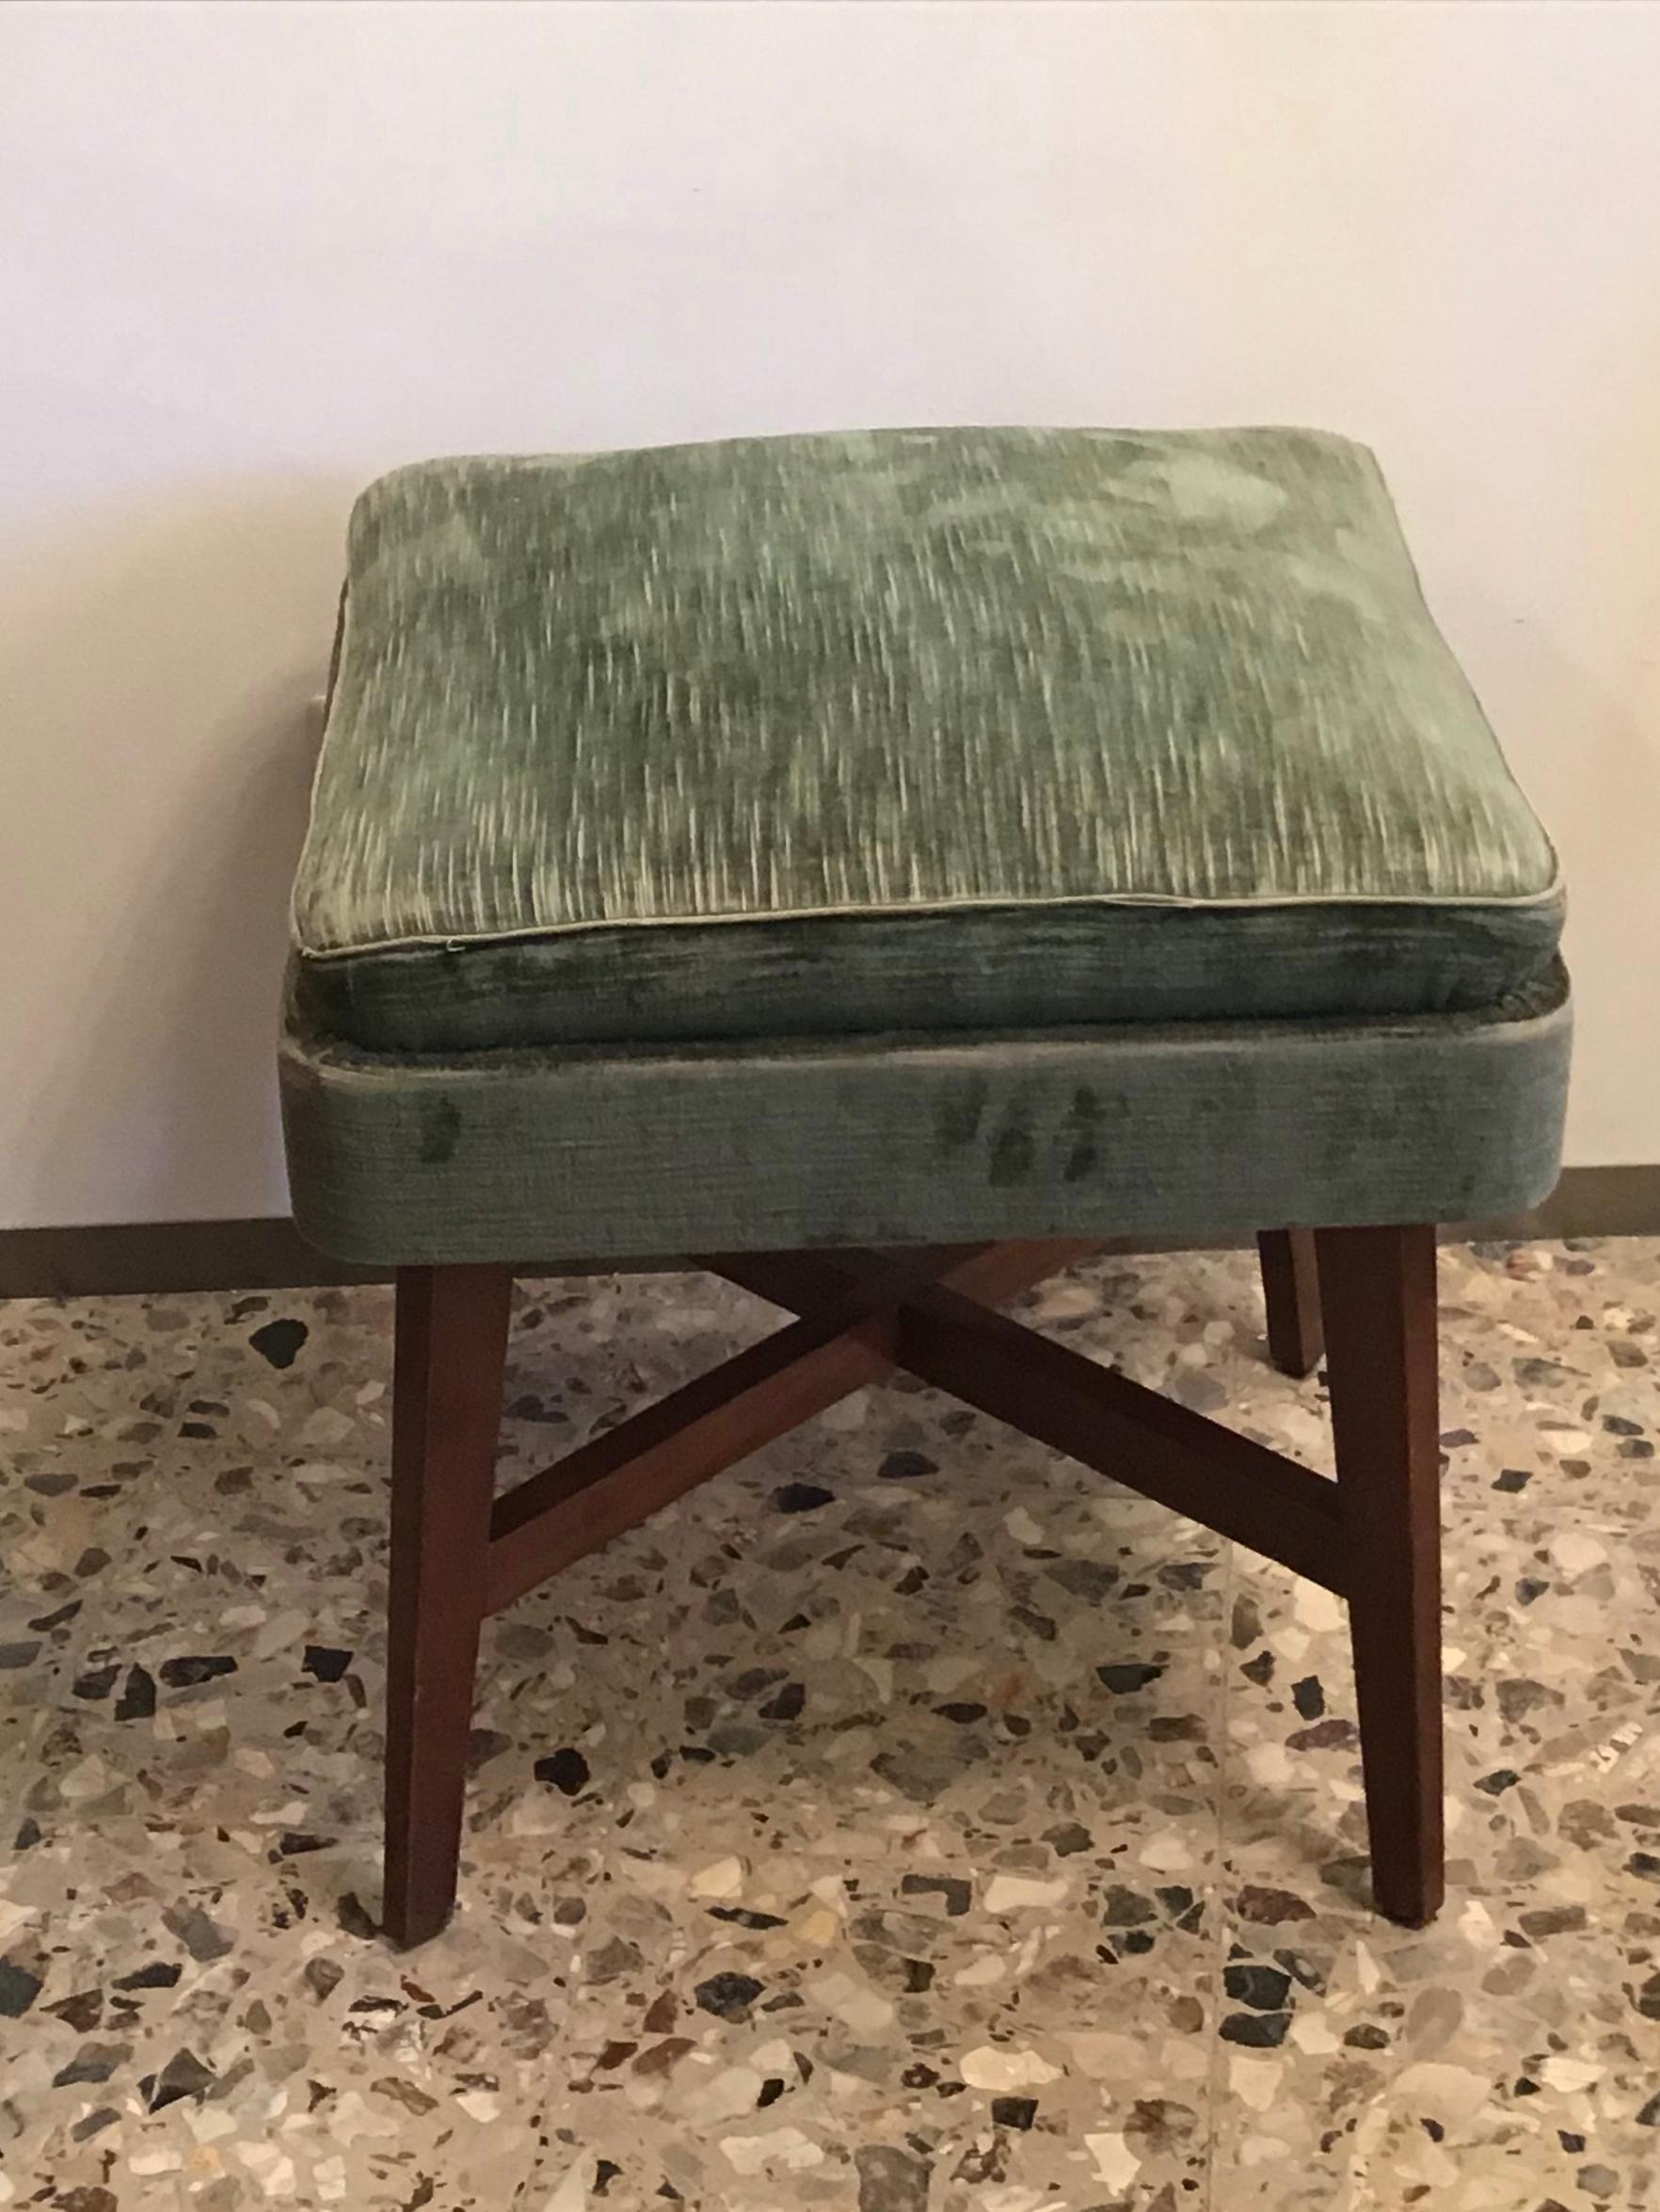 Mid-20th Century Gio Ponti “Stile” Pair of Benches /Stools Wood Seat Wood Velvet, 1950, Italy For Sale